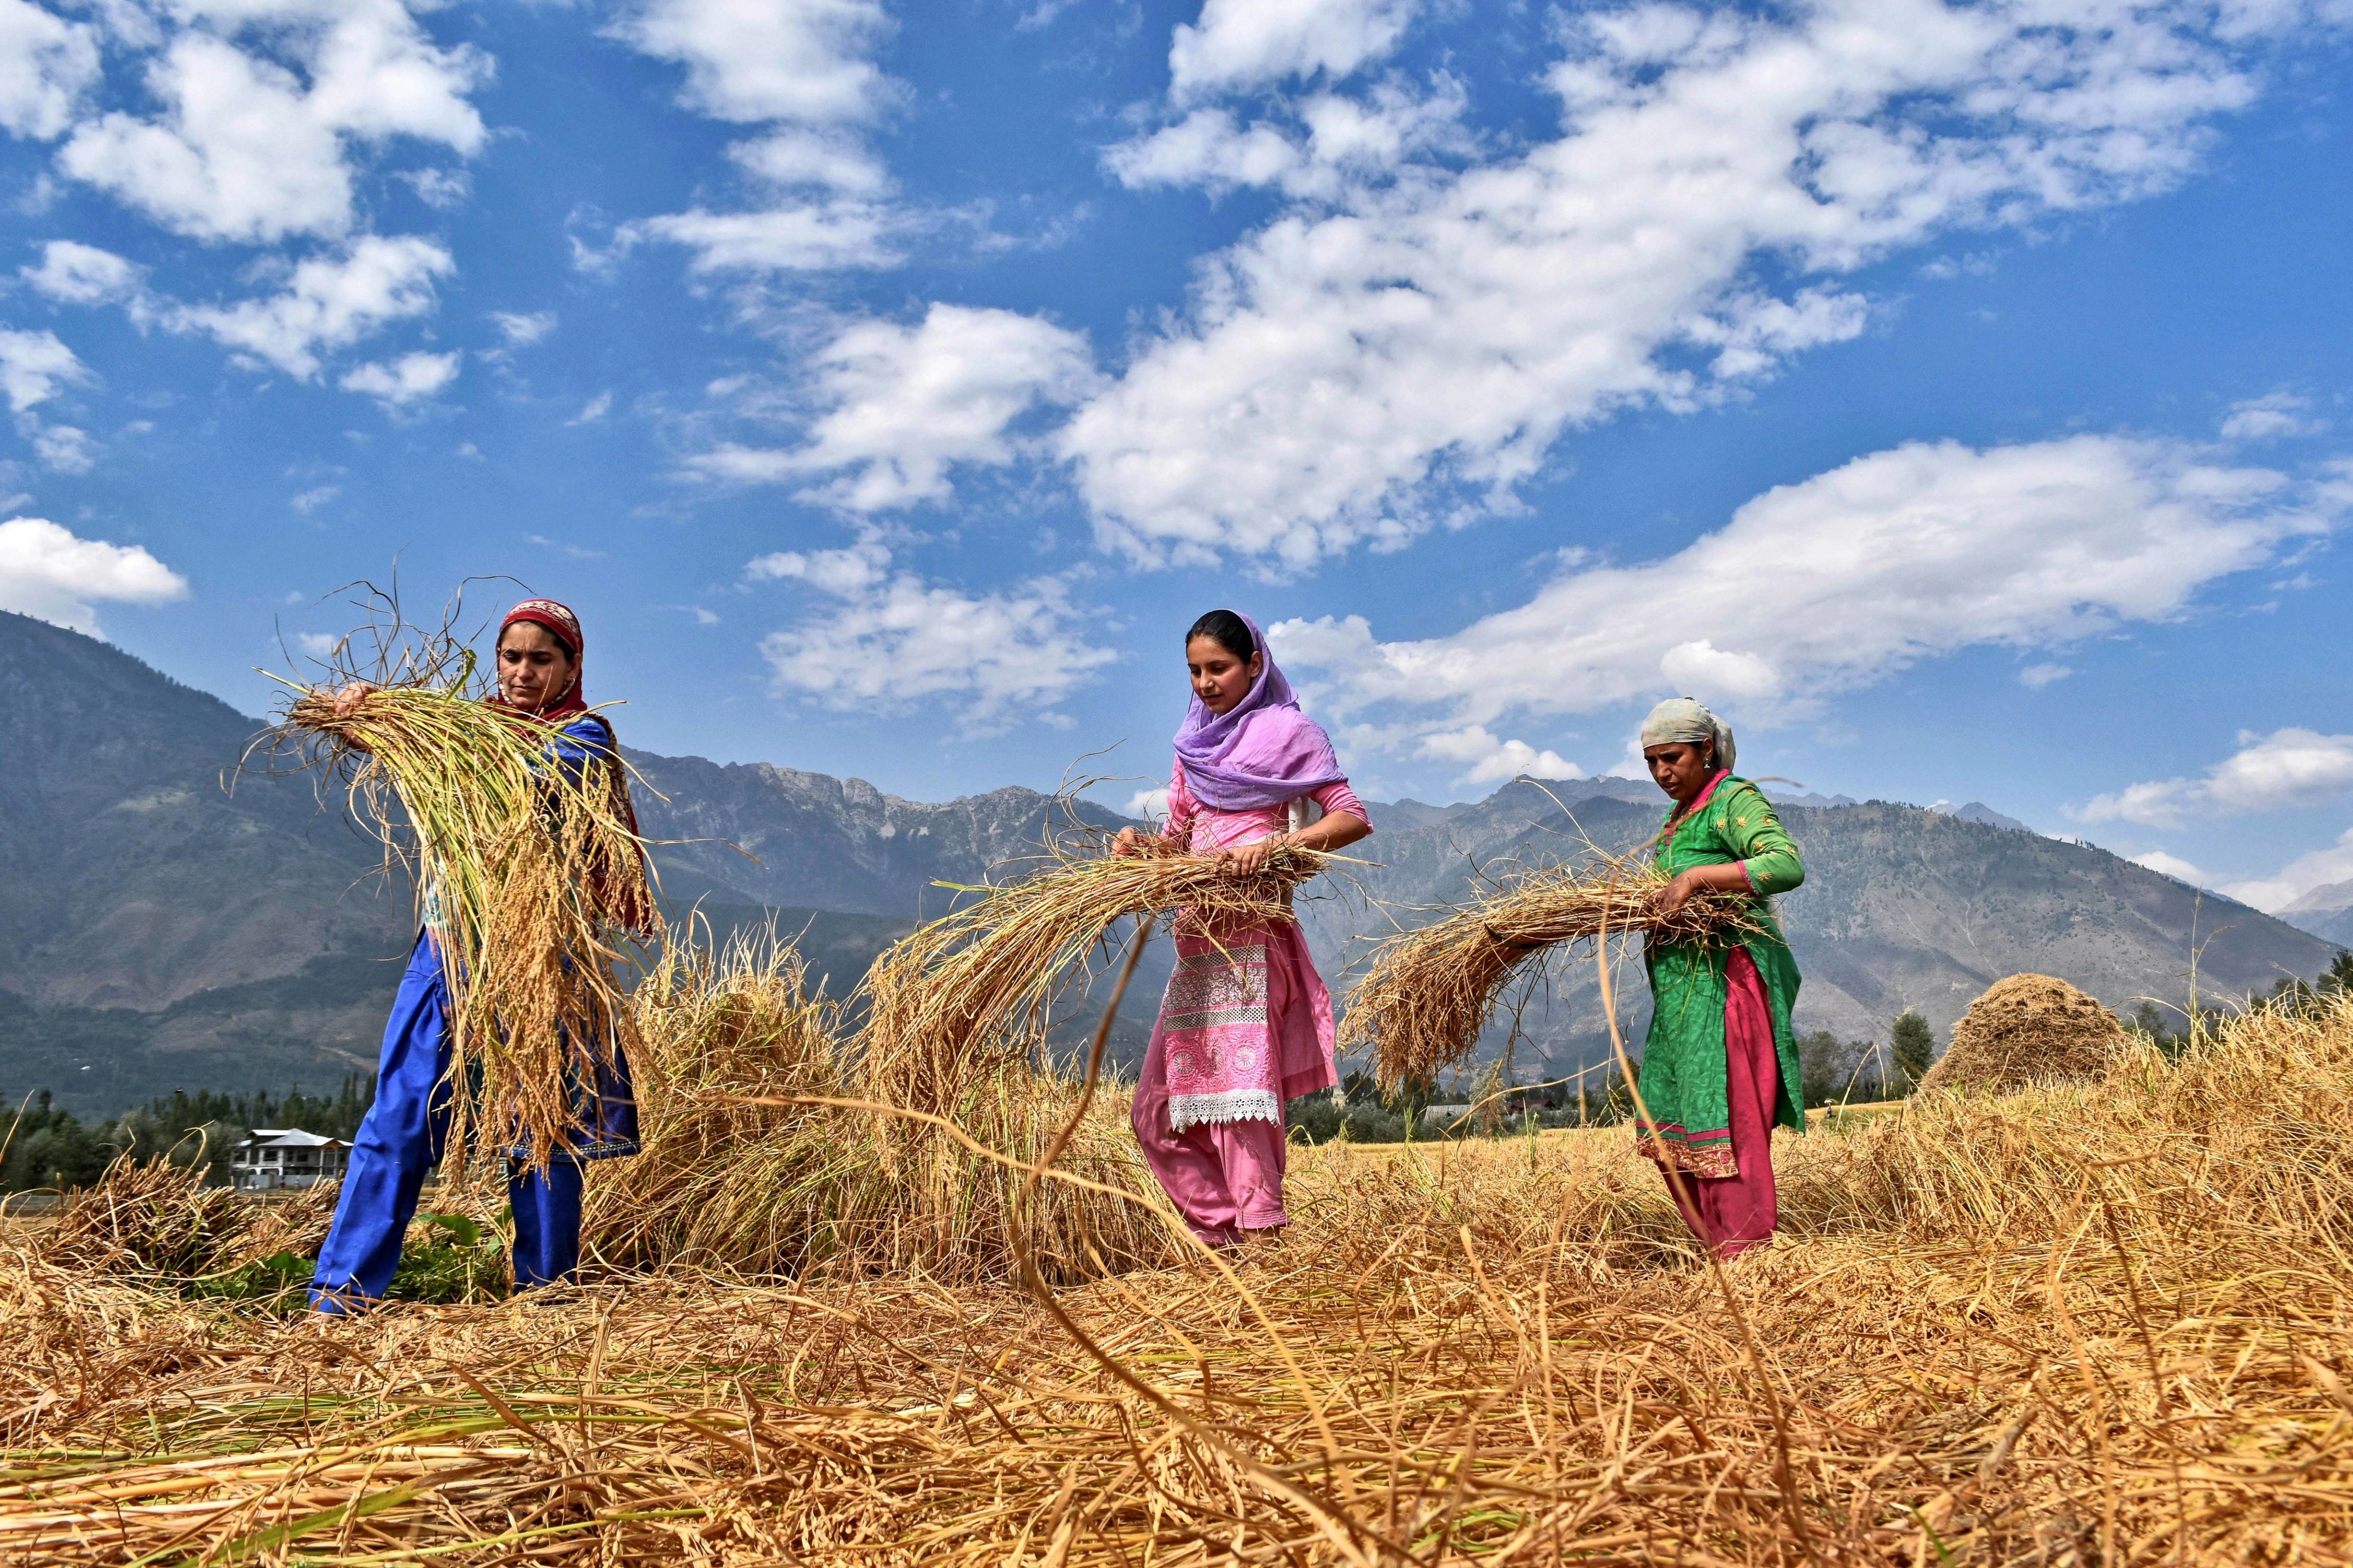 Women in a paddy field during rice harvesting season in Srinagar,Indian administered Kashmir on Sept. 24, 2017. (SOPA Images—LightRocket/Getty Images)